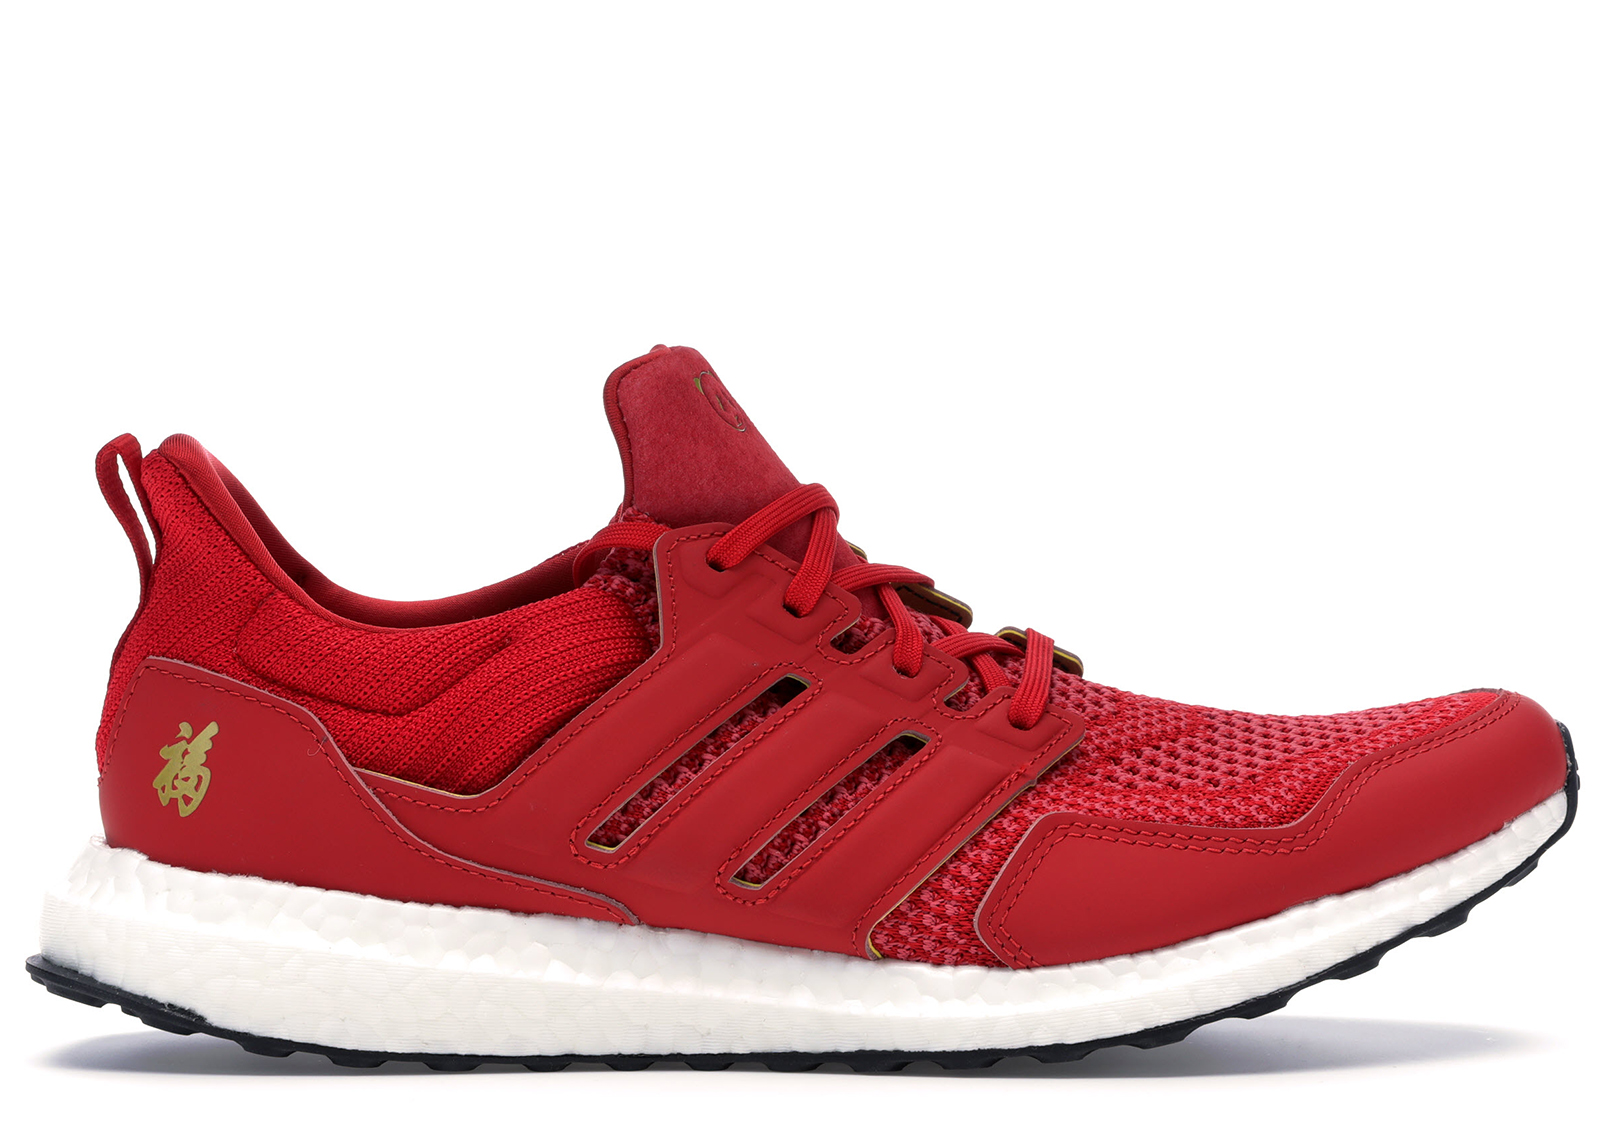 eddie huang chinese new year ultra boost